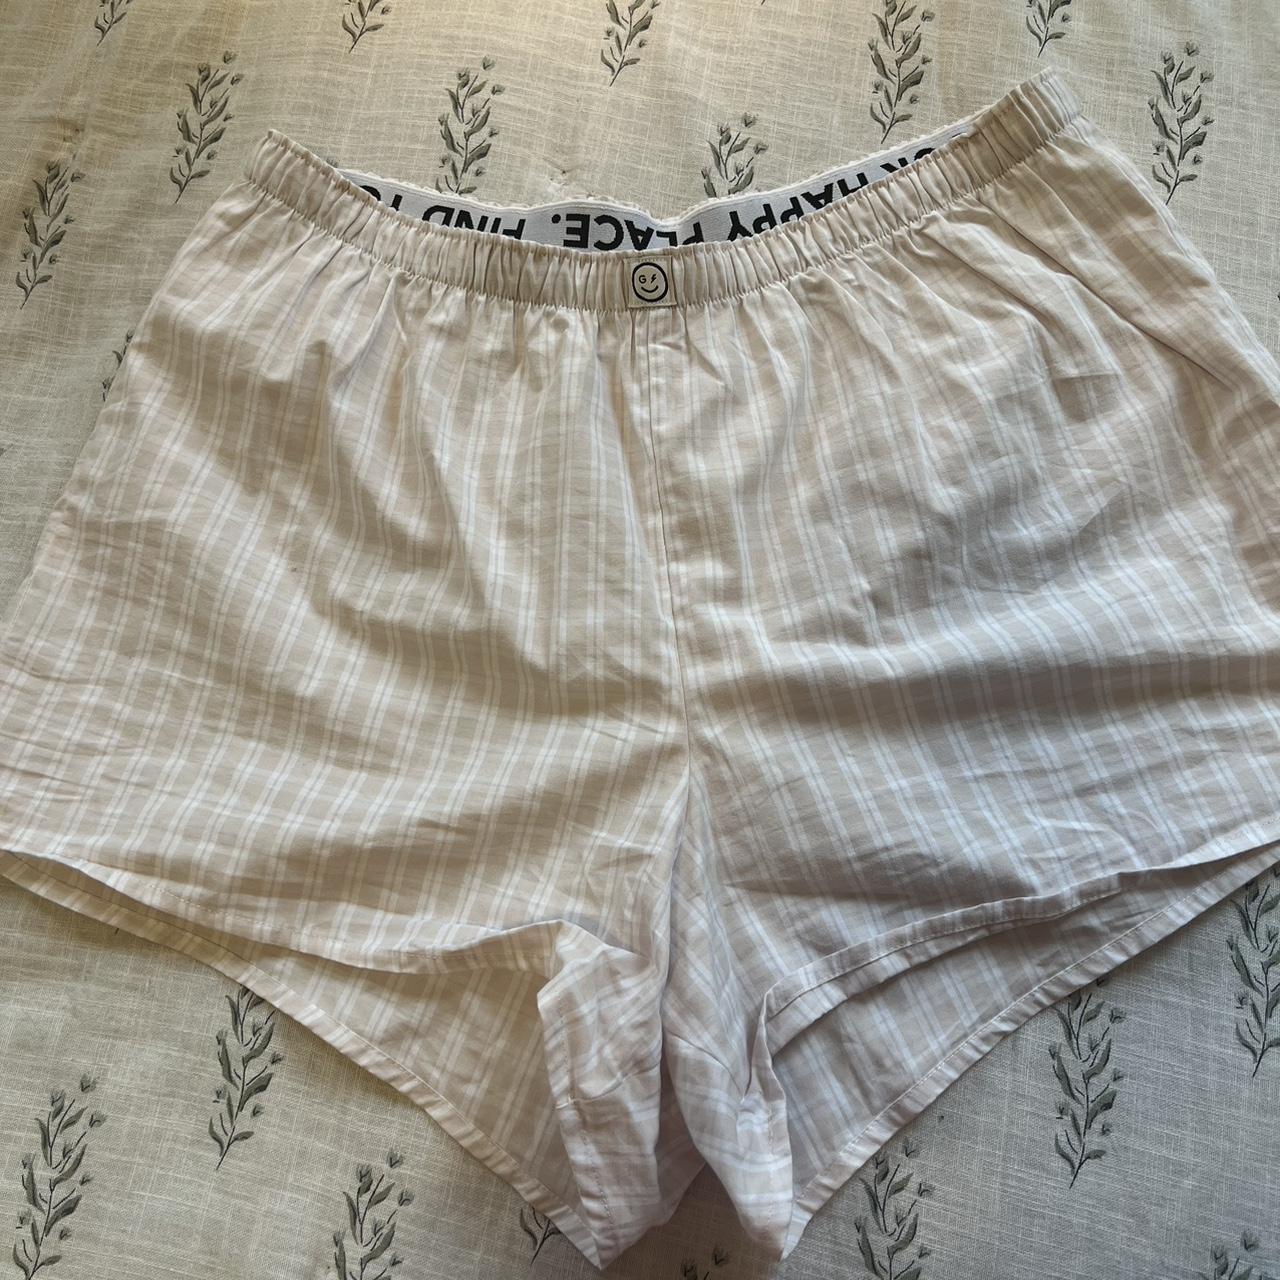 Gilly Hicks Women's White and Pink Shorts | Depop